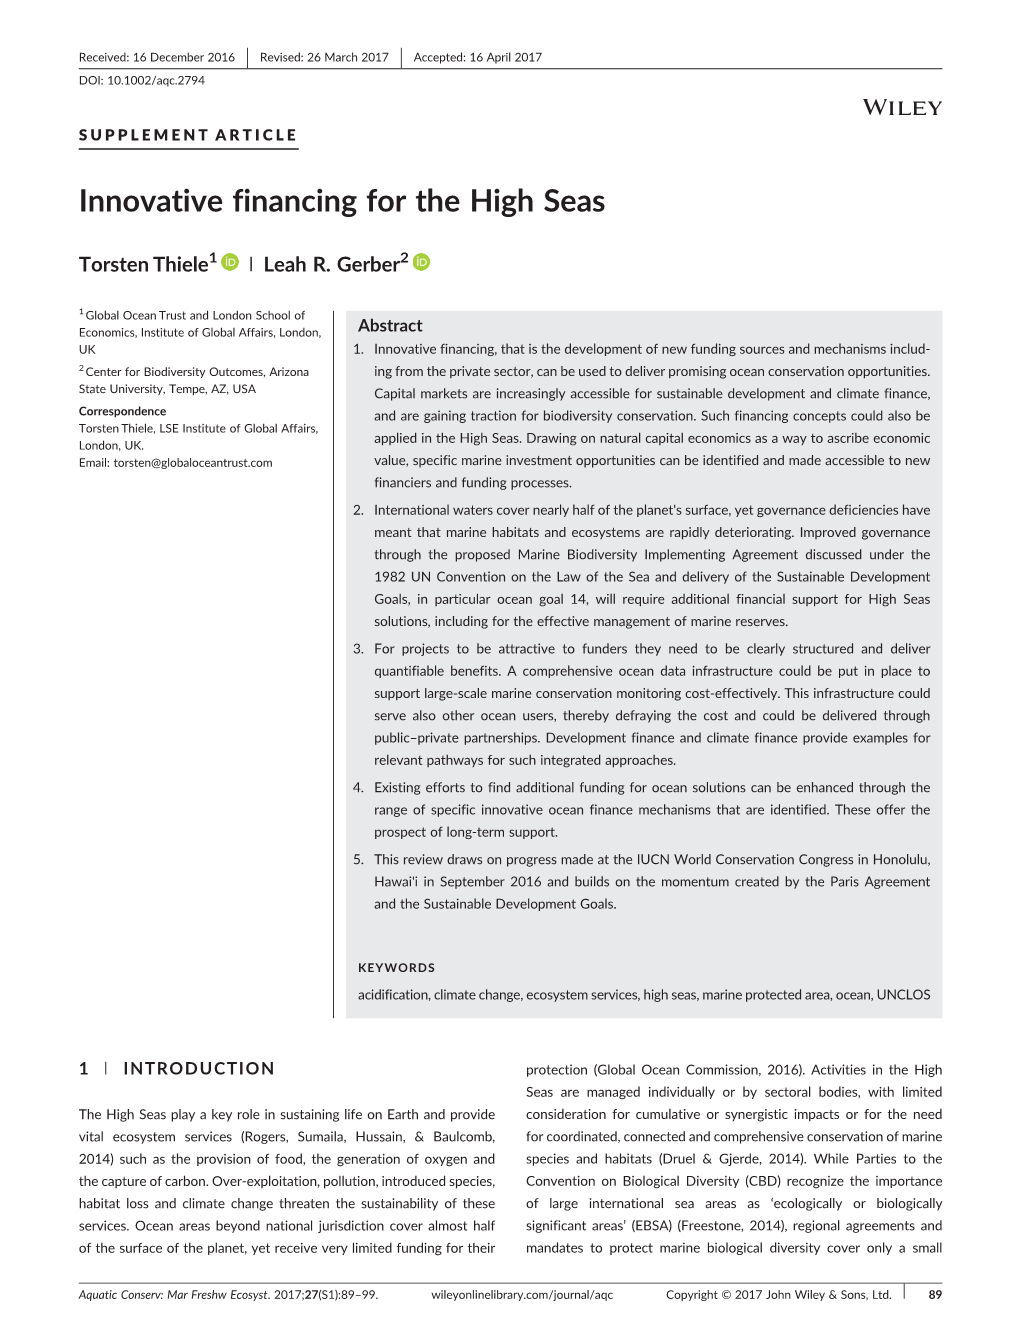 Innovative Financing for the High Seas